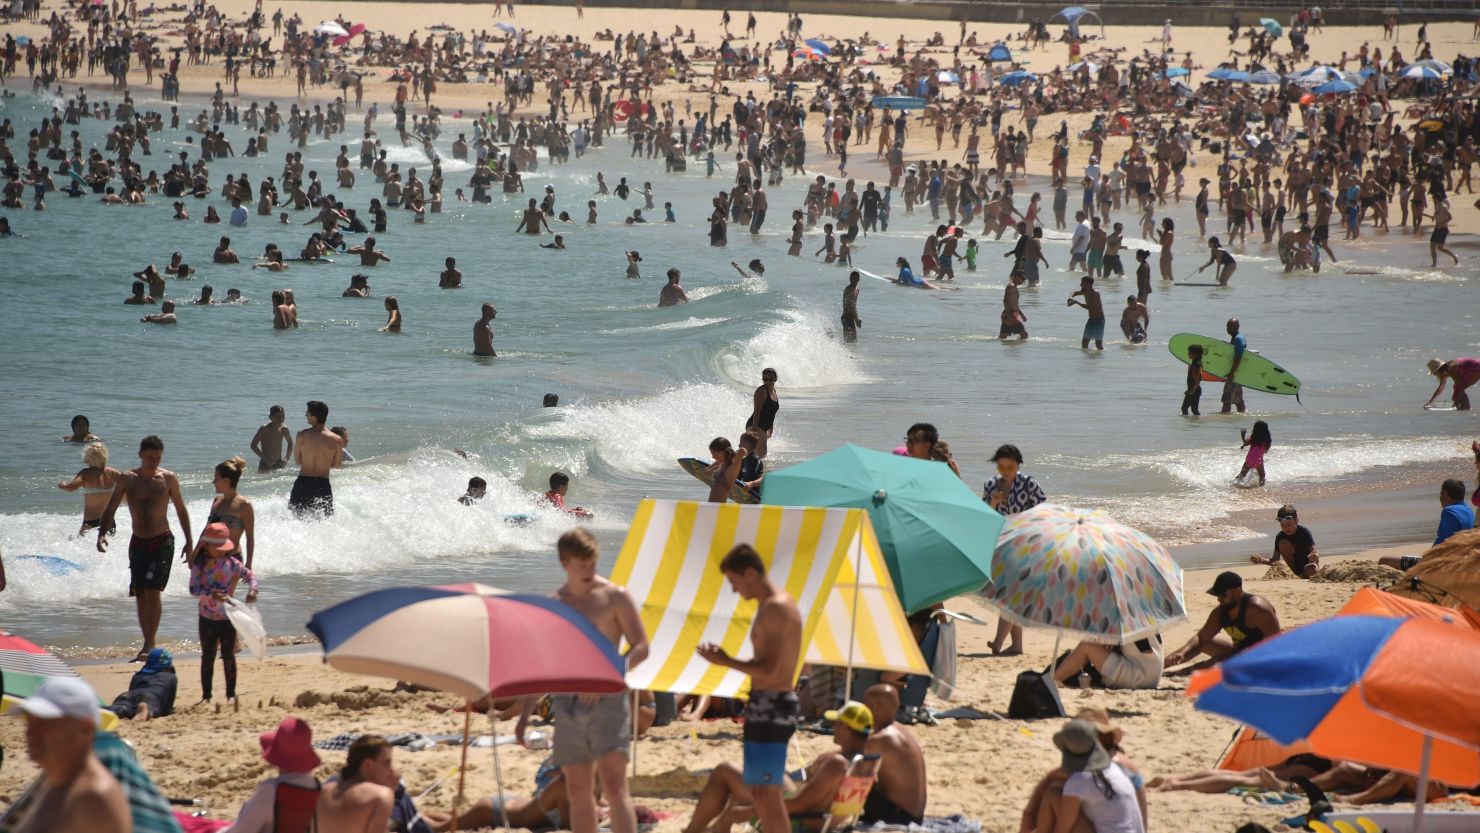 Sunbathers are seen on Bondi Beach as temperatures soar in Sydney on December 28, during one of two major heatwaves to scorch the continent.